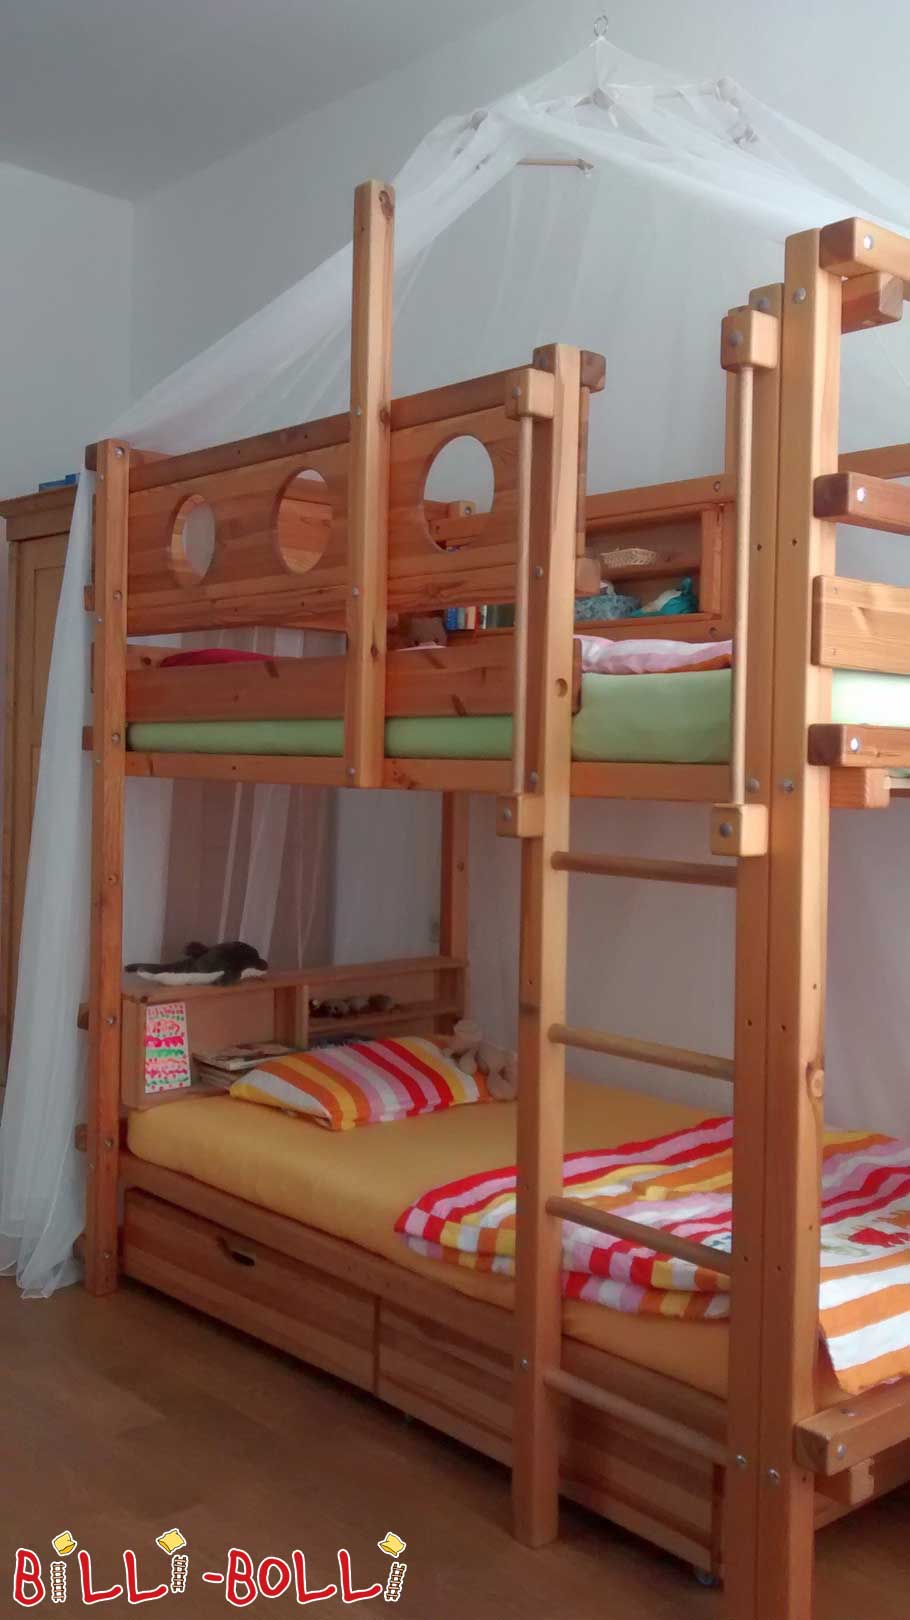 Additional sleeping area for loft bed growing with (Category: second hand loft bed)